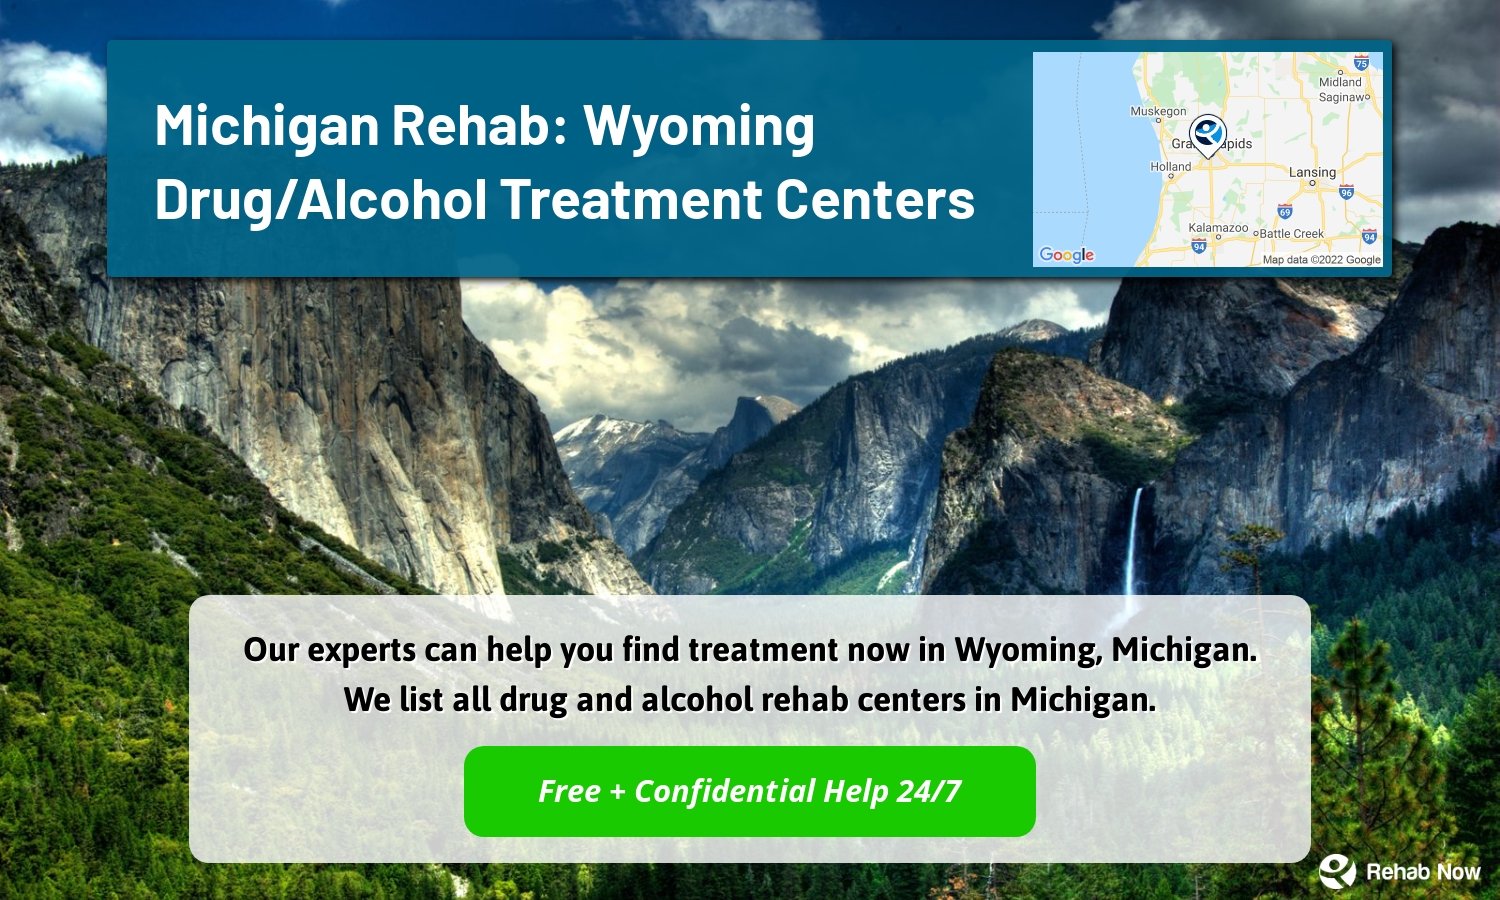 Our experts can help you find treatment now in Wyoming, Michigan. We list all drug and alcohol rehab centers in Michigan.